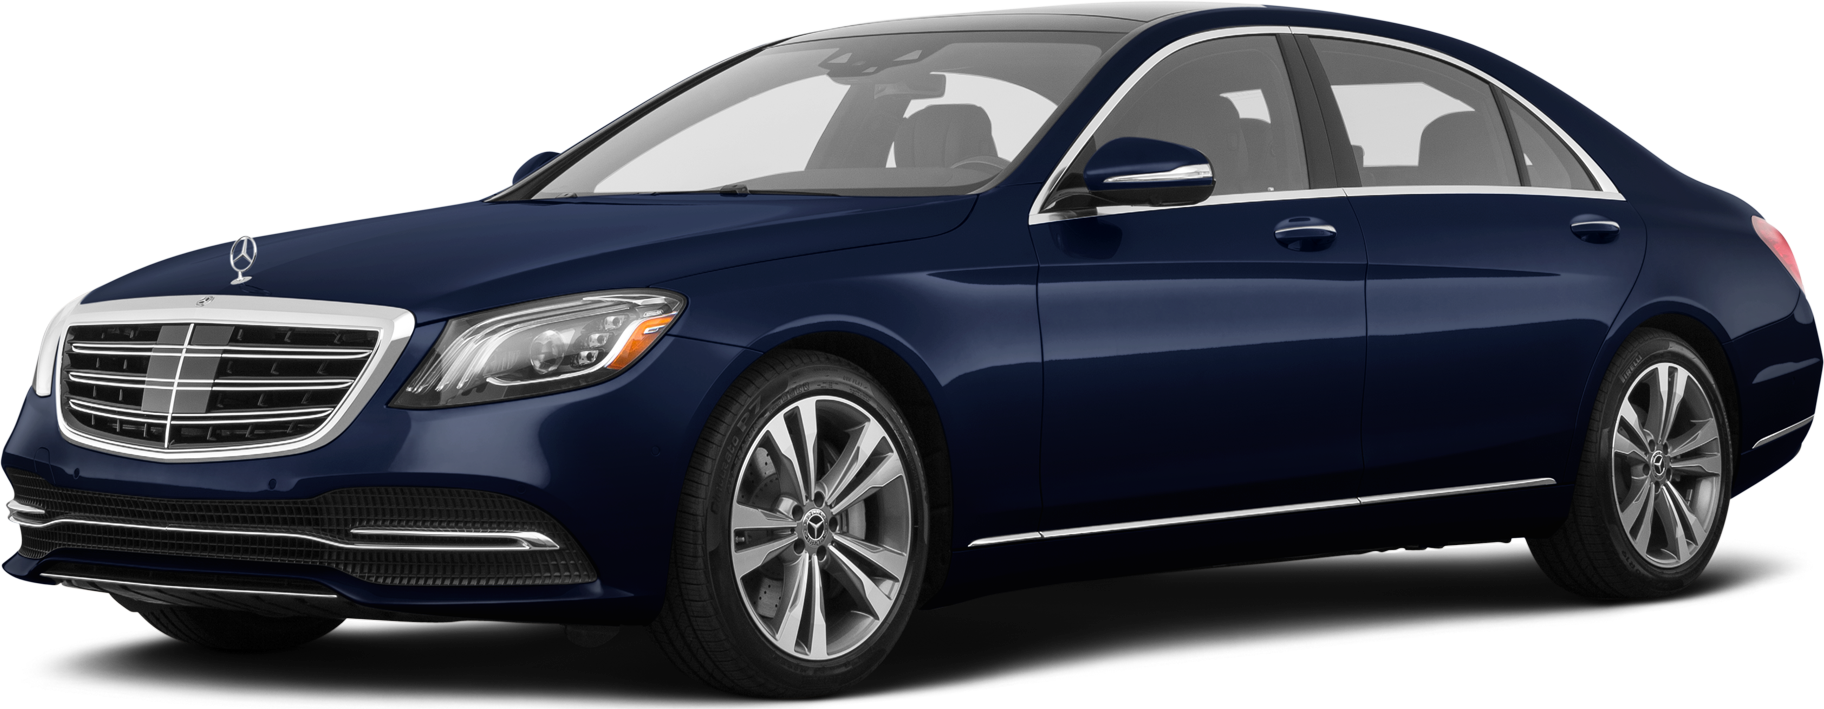 2018 Mercedes Benz S Class Price Value Ratings And Reviews Kelley